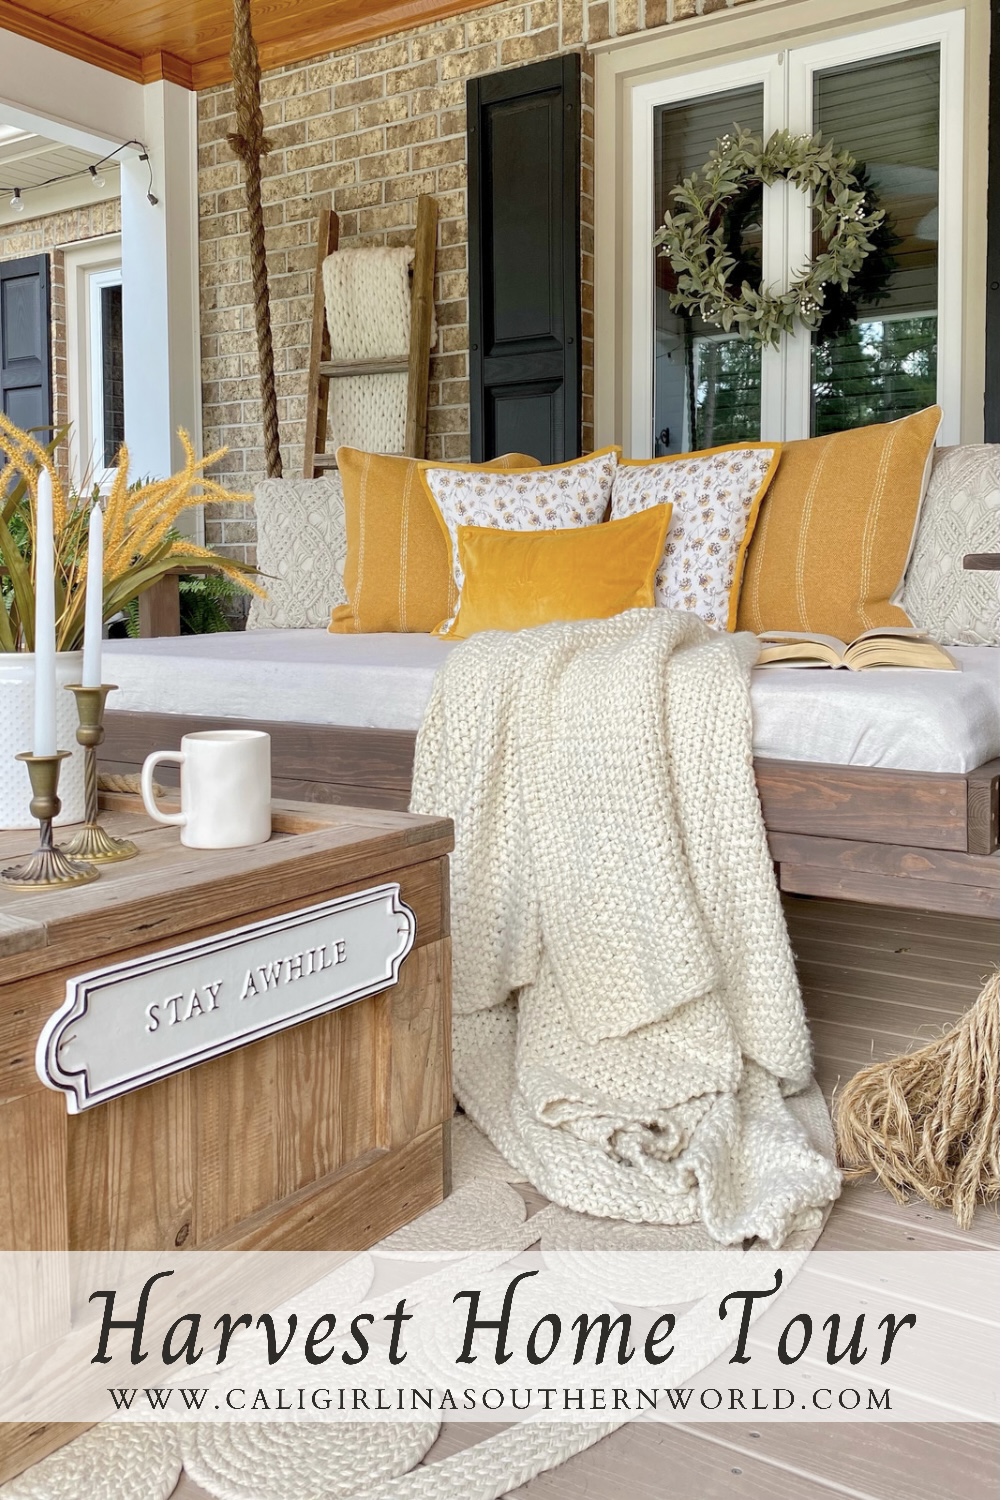 Front porch swing decorated for early fall with mustard yellow home decor accents, cream, and green.